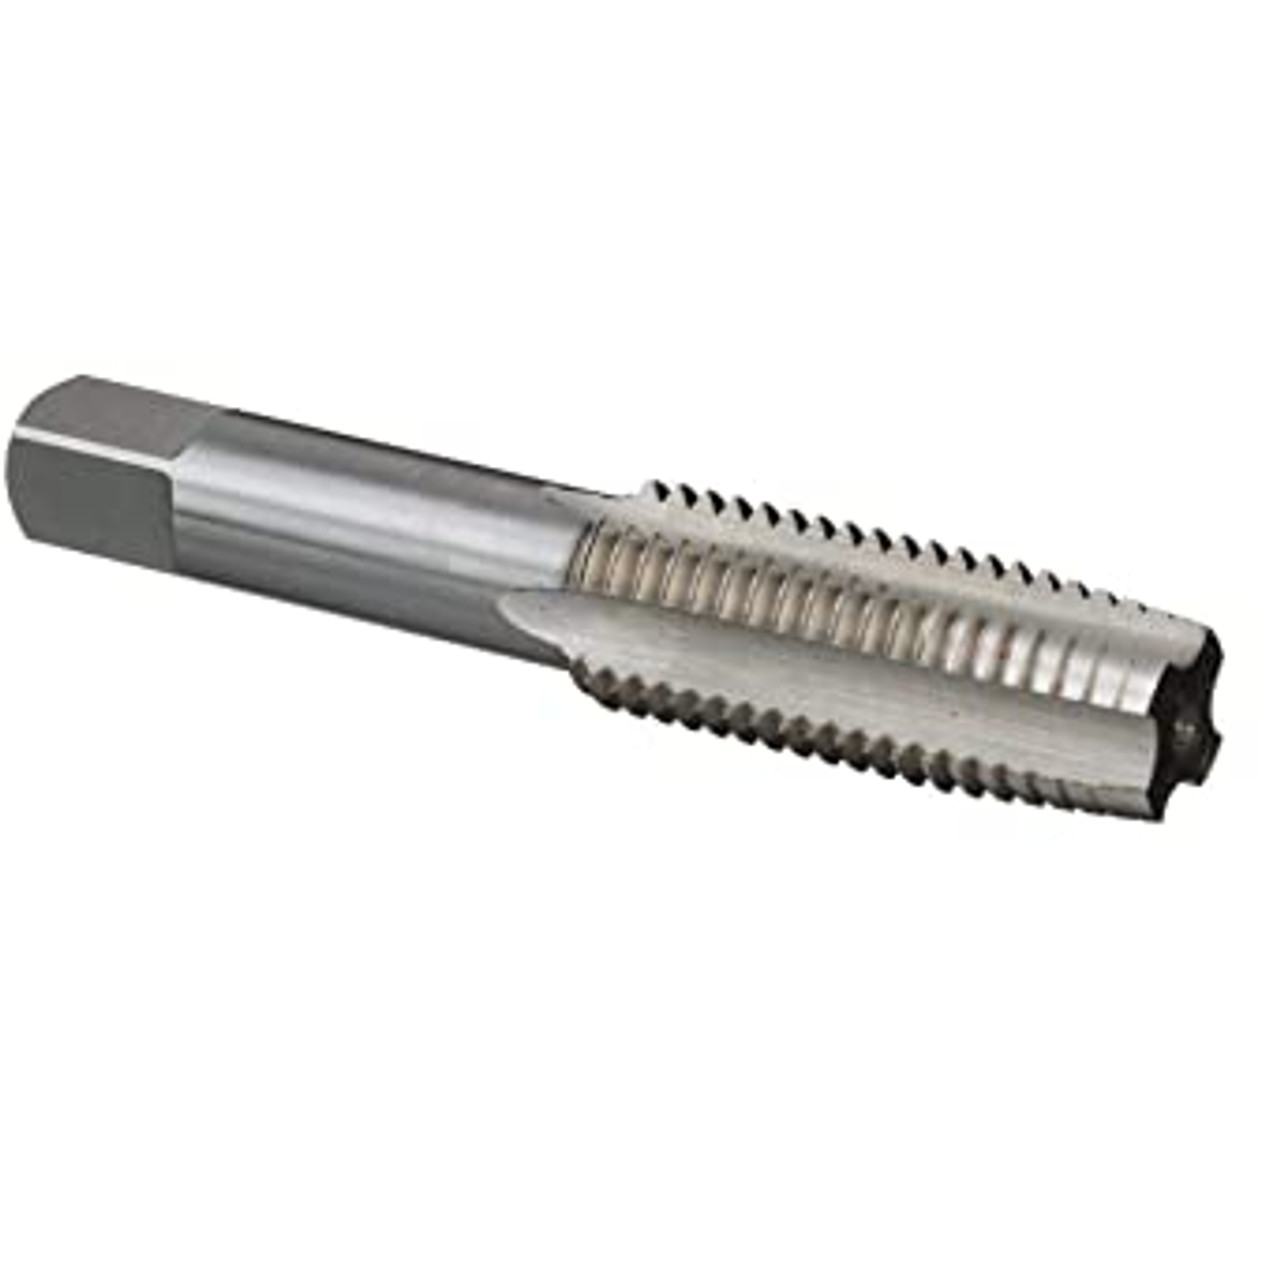 12-24 Helicoil Tap  819-1